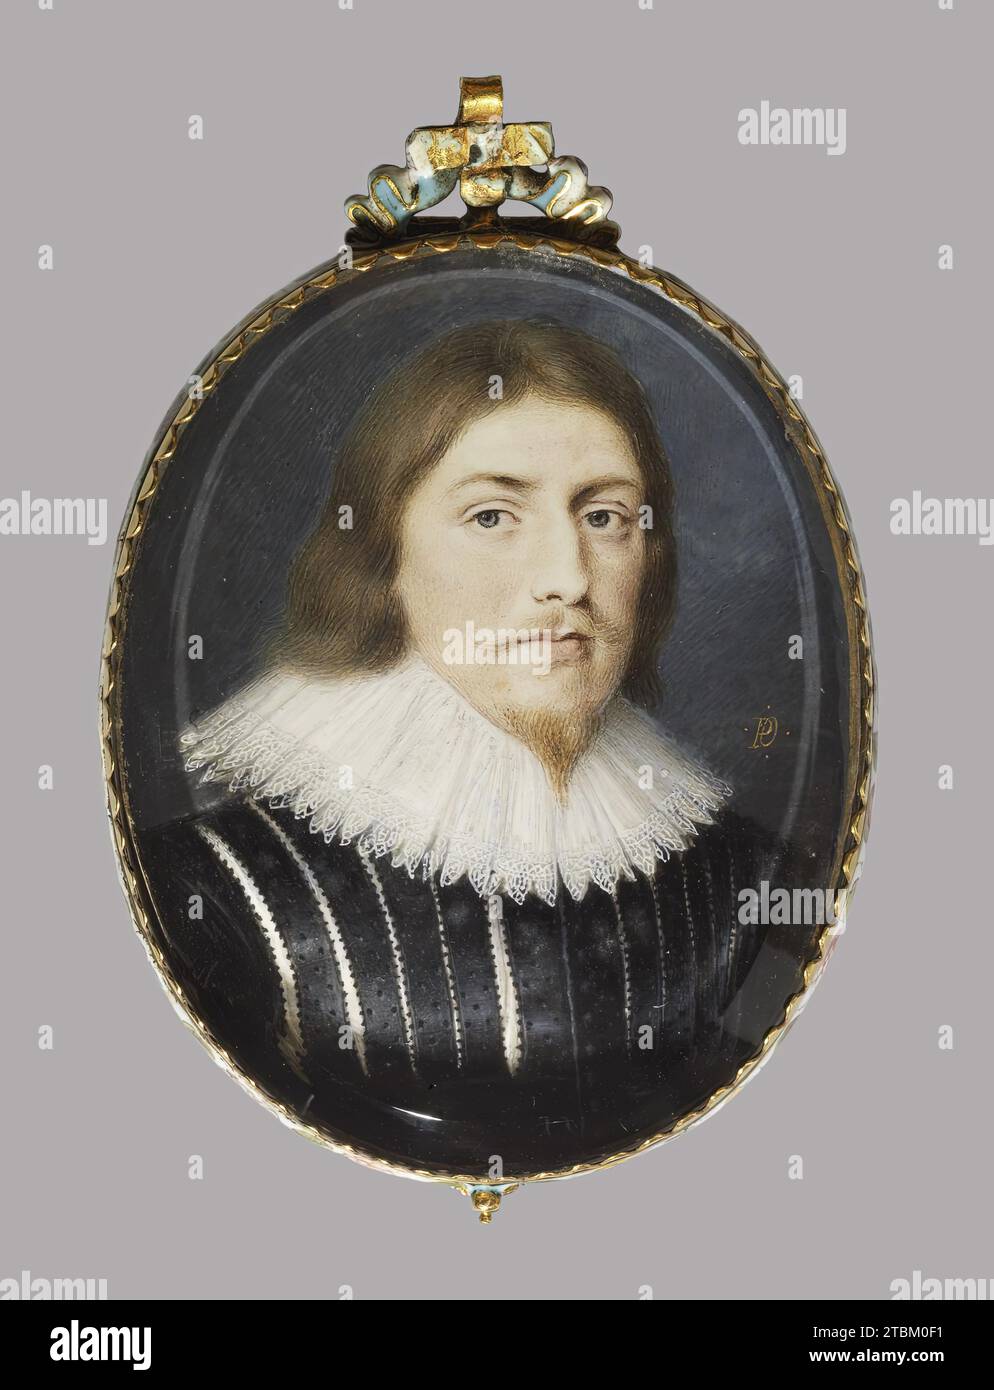 George Calvert, First Lord Baltimore, c1615-1620. Miniature portrait of George Calvert, 1st Baron Baltimore (1580-1632), an English peer and politician. Calvert was a member of parliament and served as Secretary of State under King James I. Stock Photo